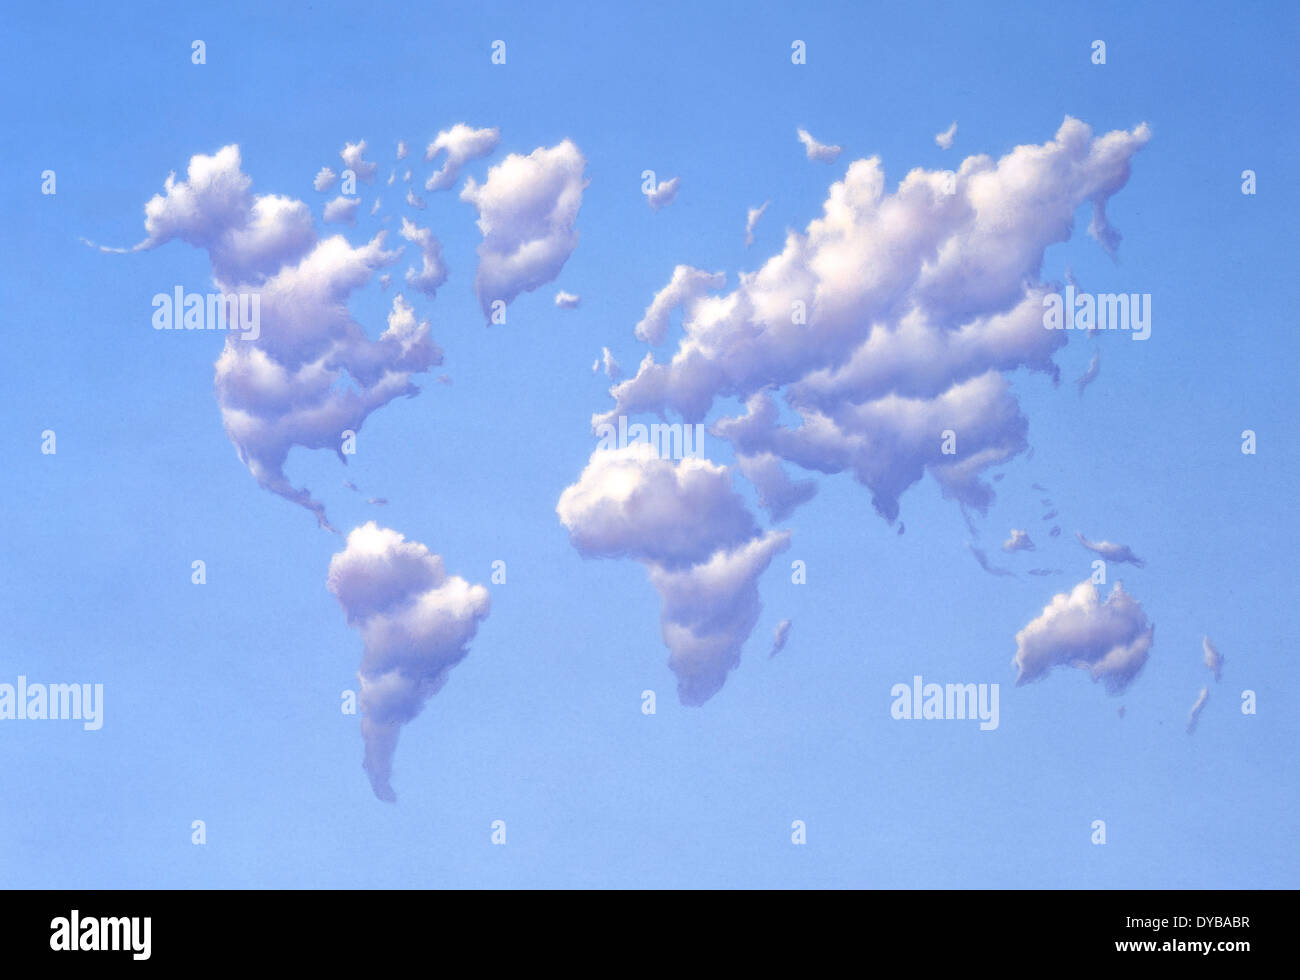 Clouds forming the shape of Earth's continents. Stock Photo